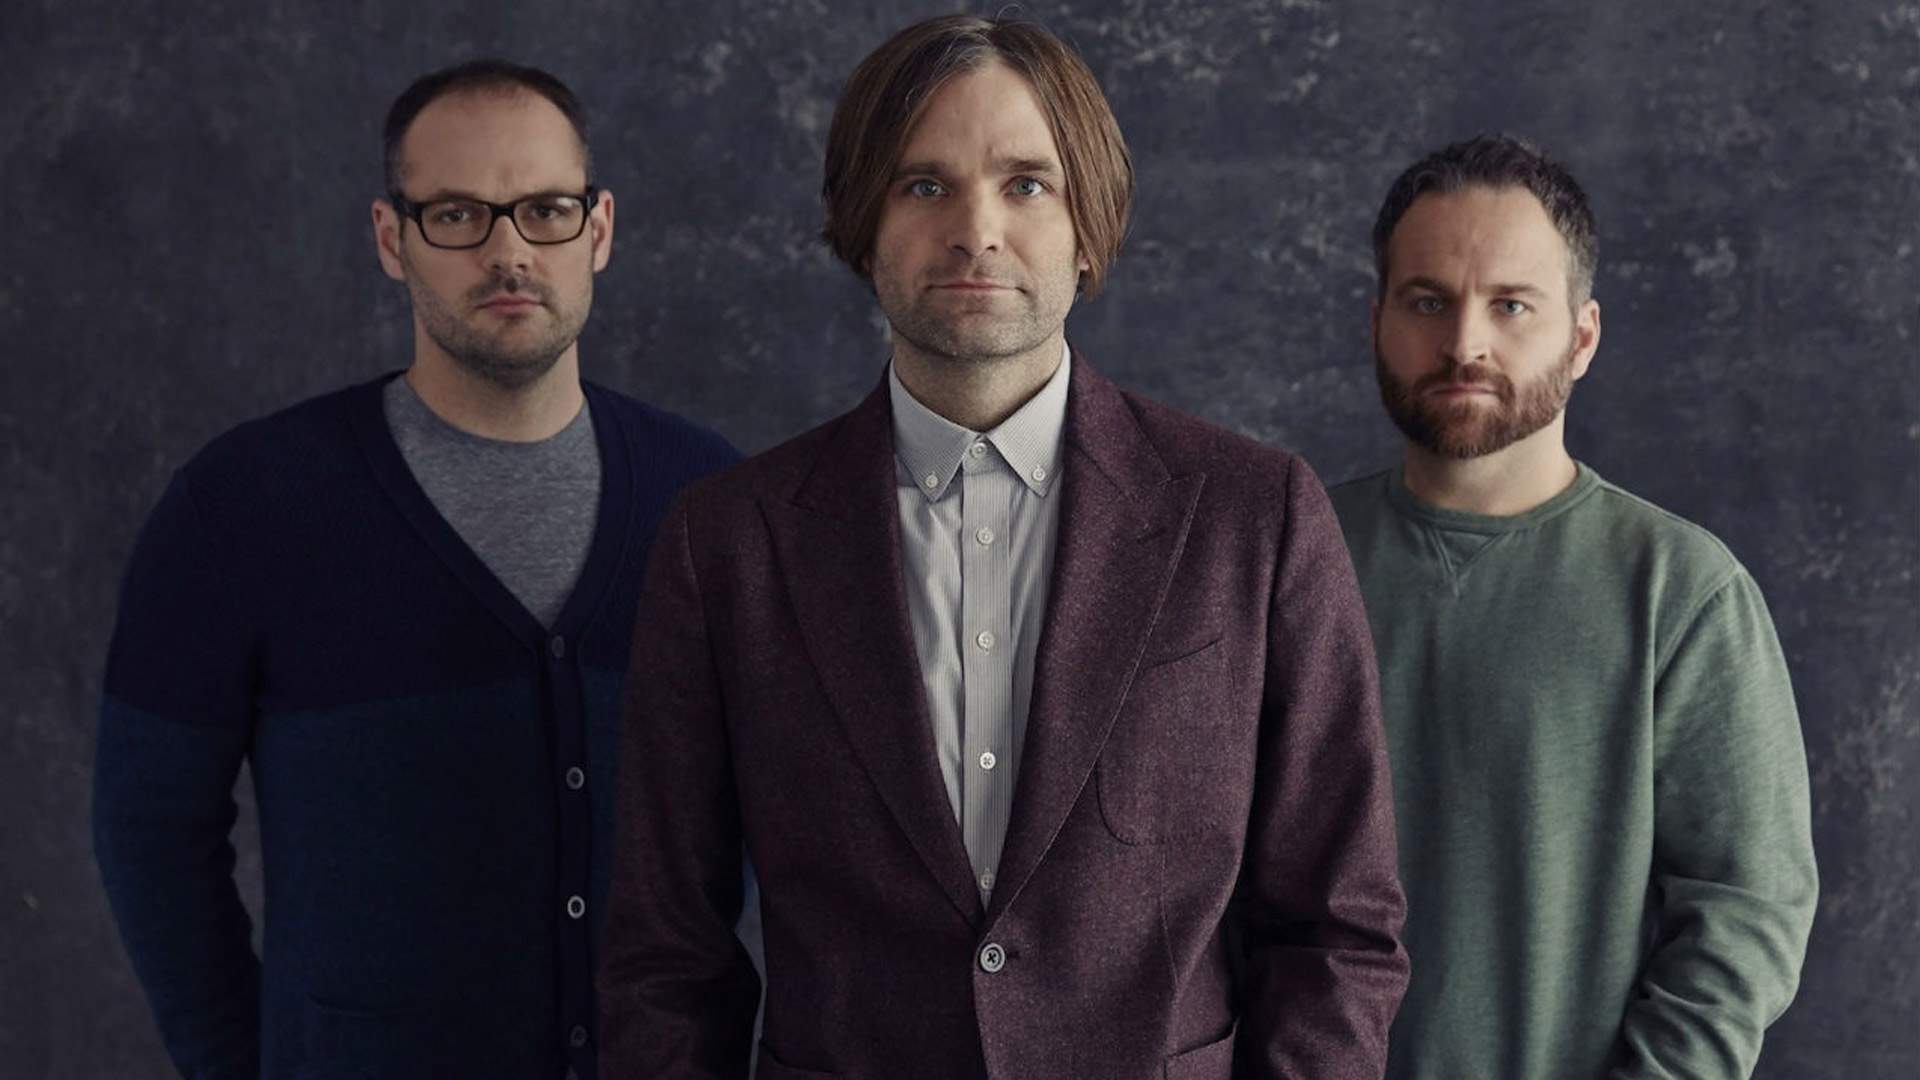 So This Is...A Death Cab for Cutie Party